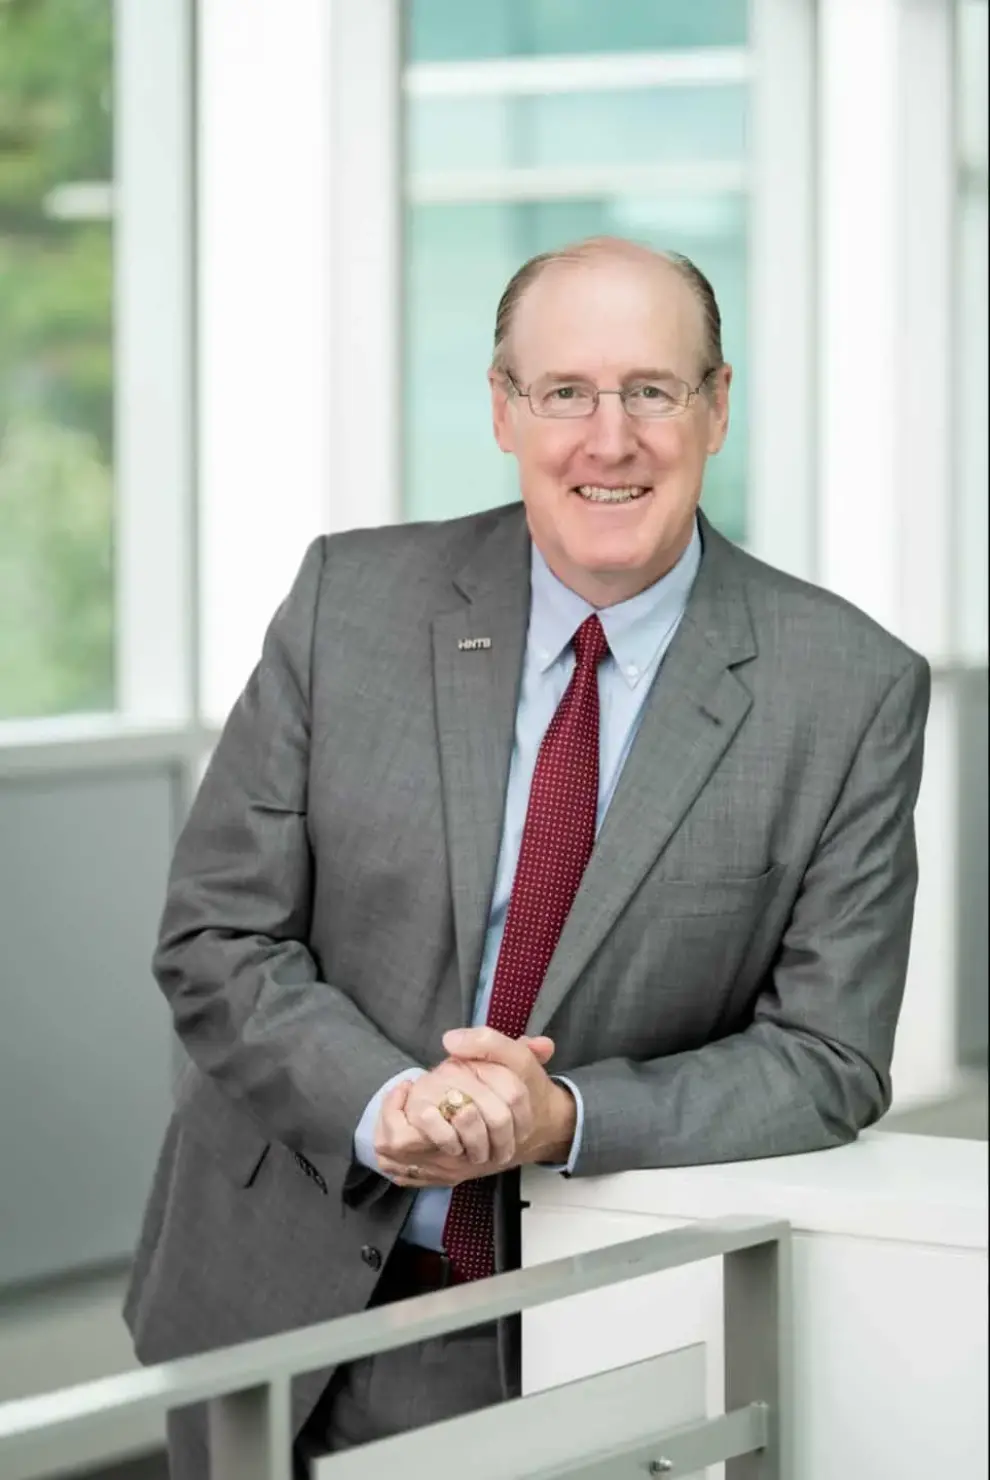 HNTB’s John Barton to chair ITS America committee on smart infrastructure